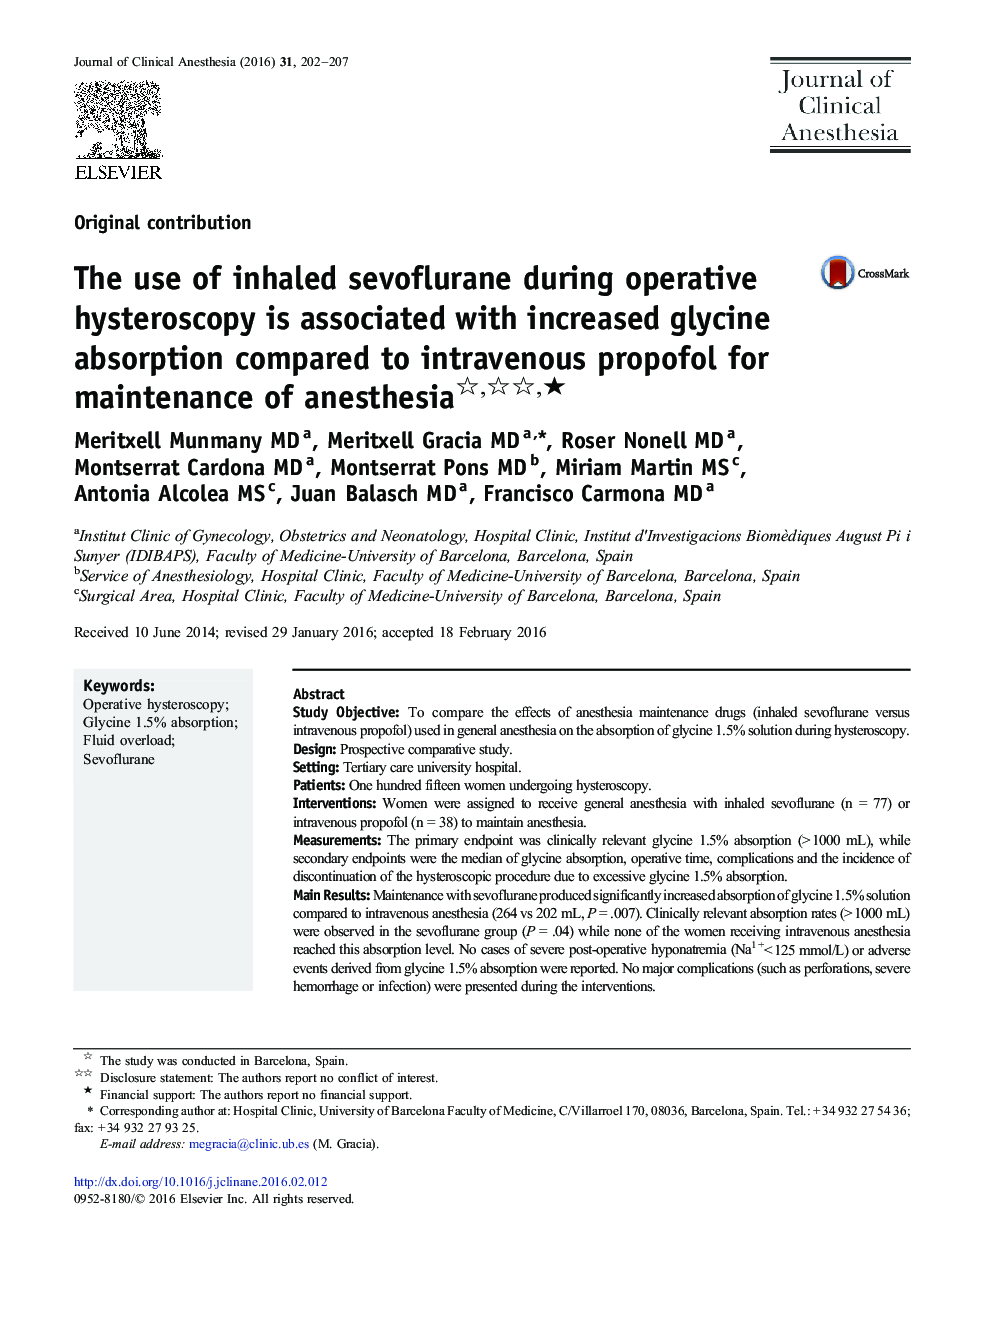 The use of inhaled sevoflurane during operative hysteroscopy is associated with increased glycine absorption compared to intravenous propofol for maintenance of anesthesia